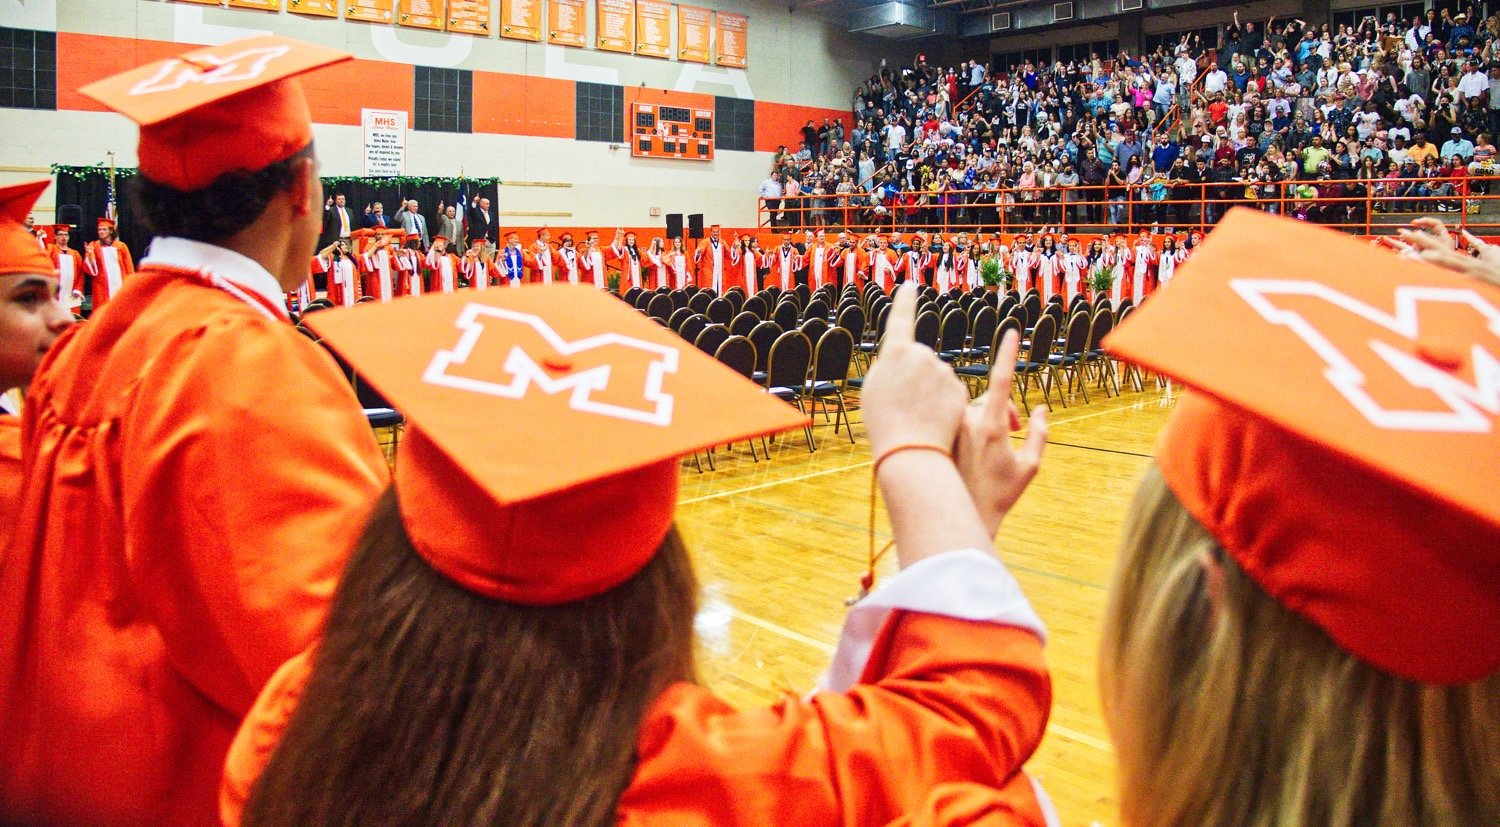 The newly-minted Mineola alumni sing their alma mater together as a class one last time. [more moments of Mineola grads]